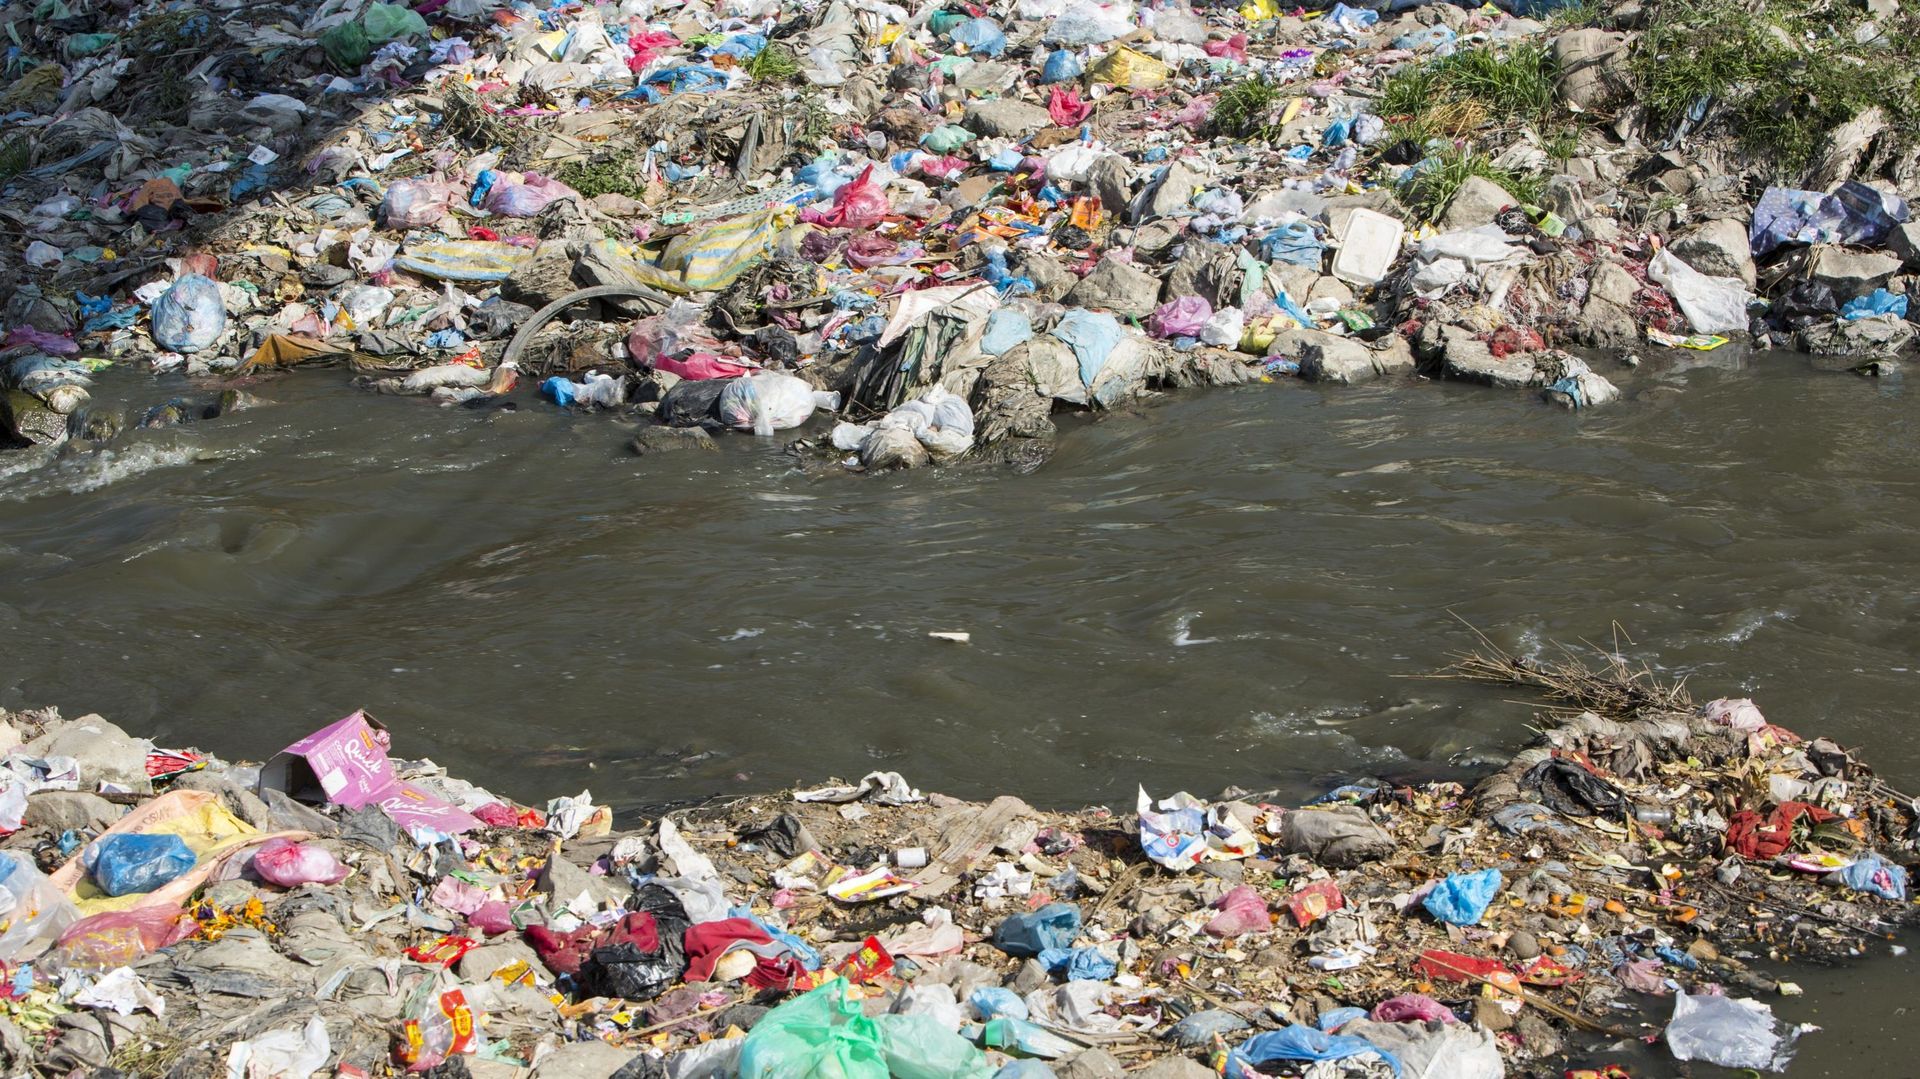 The Bagmati river running through Kathmandu in Nepal. The river is full of litter and raw sewage